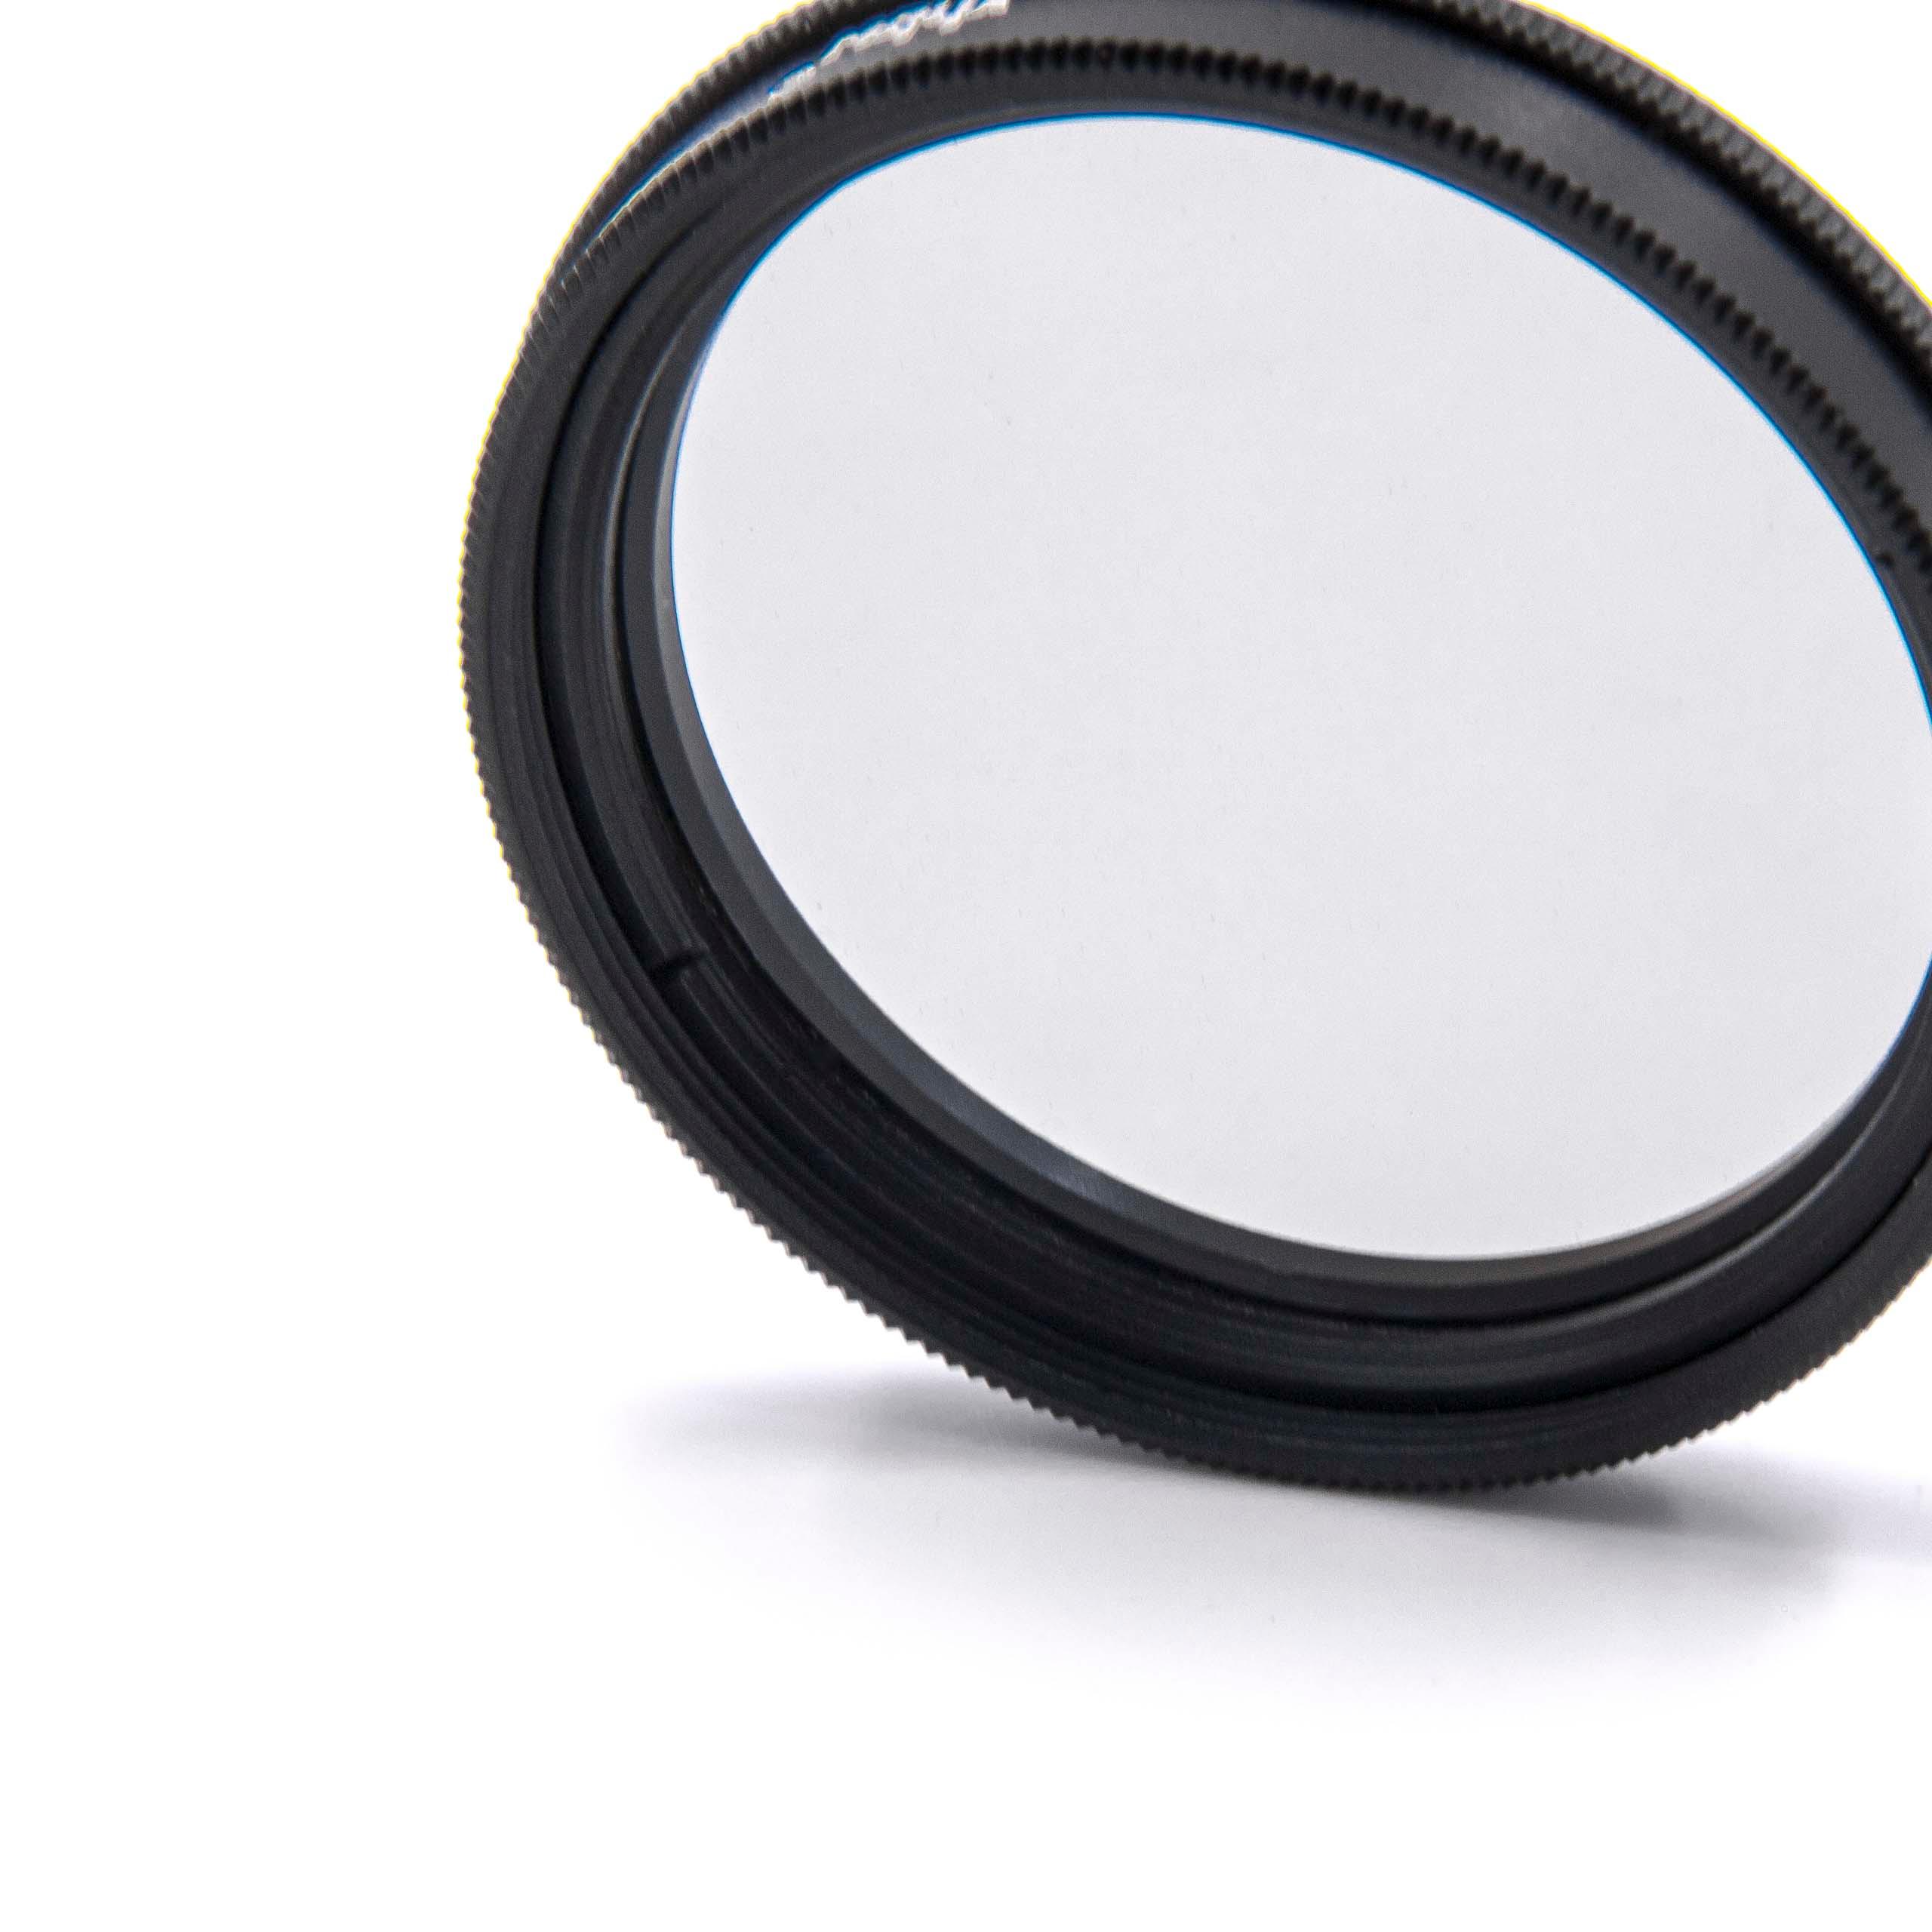 Polarising Filter suitable for Cameras & Lenses with 39 mm Filter Thread - CPL Filter